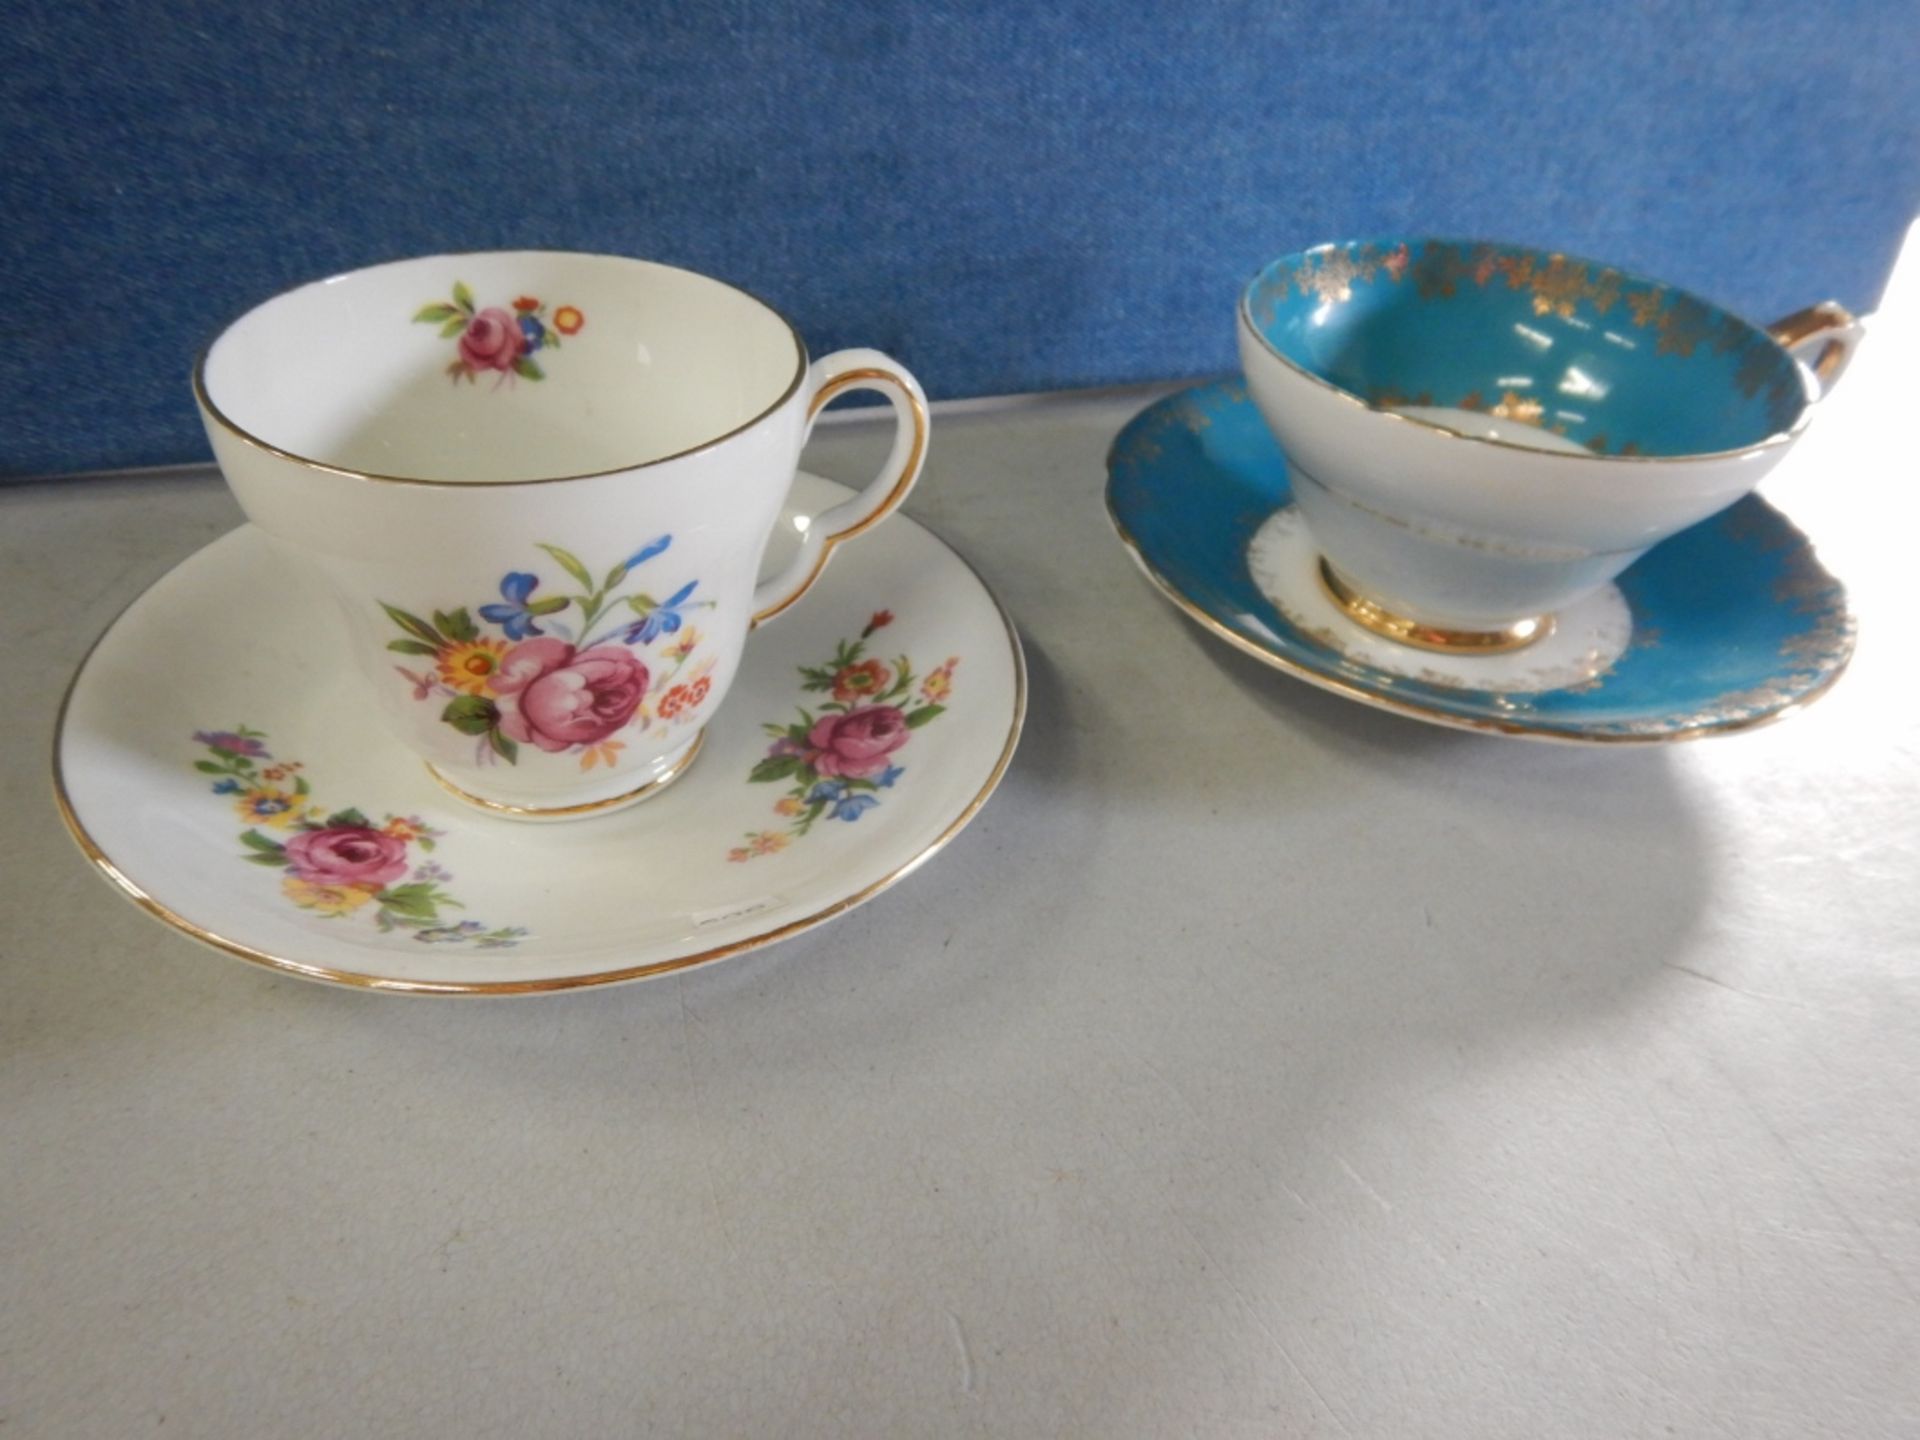 ANTIQUE TEACUPS & SAUCERS - MADE IN ENGLAND - LOT OF 2 - FINE BONE CHINA EST. 1875 "STANLEY" - #